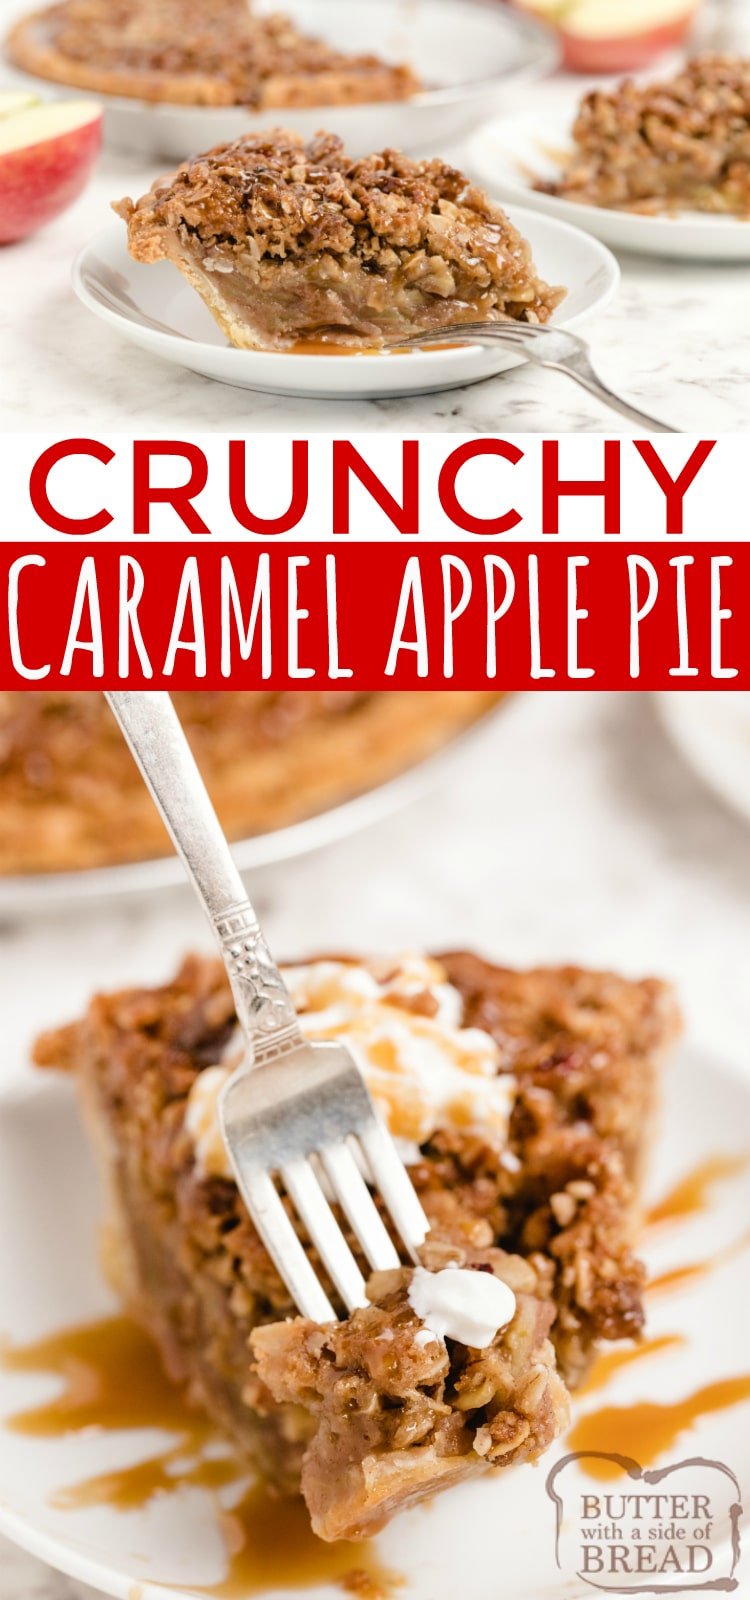 Crunchy Caramel Apple Pie made with a pre-made pie crust, filled with sliced apples and topped with a crunchy sweet streusel, pecans and caramel! Easy apple pie recipe topped with a buttery brown sugar and oat topping instead of a traditional pie crust. 